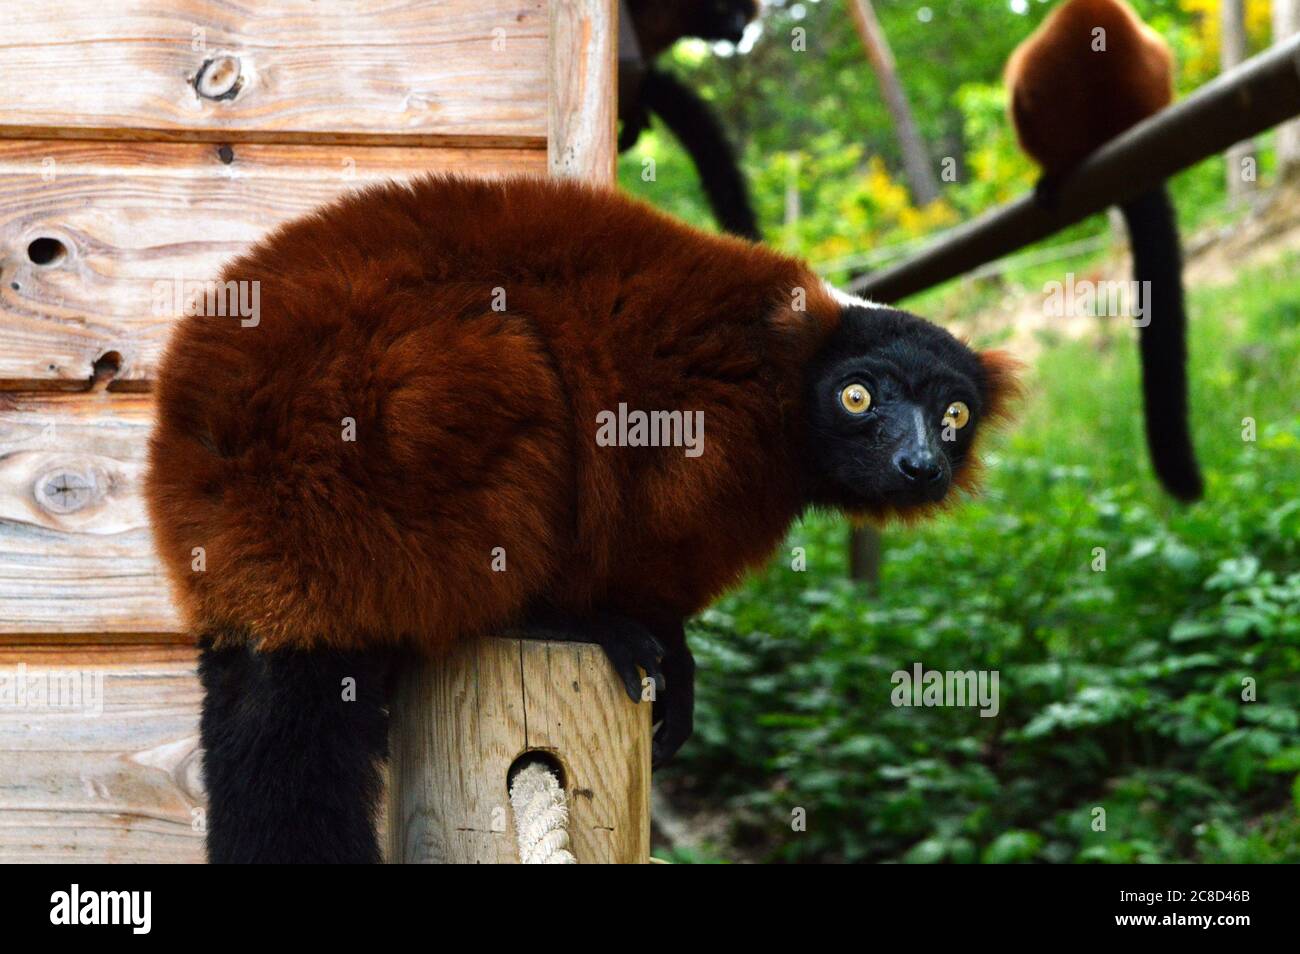 Magnificent red ruffed lemur, it is a lemuridae type monkey. This is endangered animal. Stock Photo